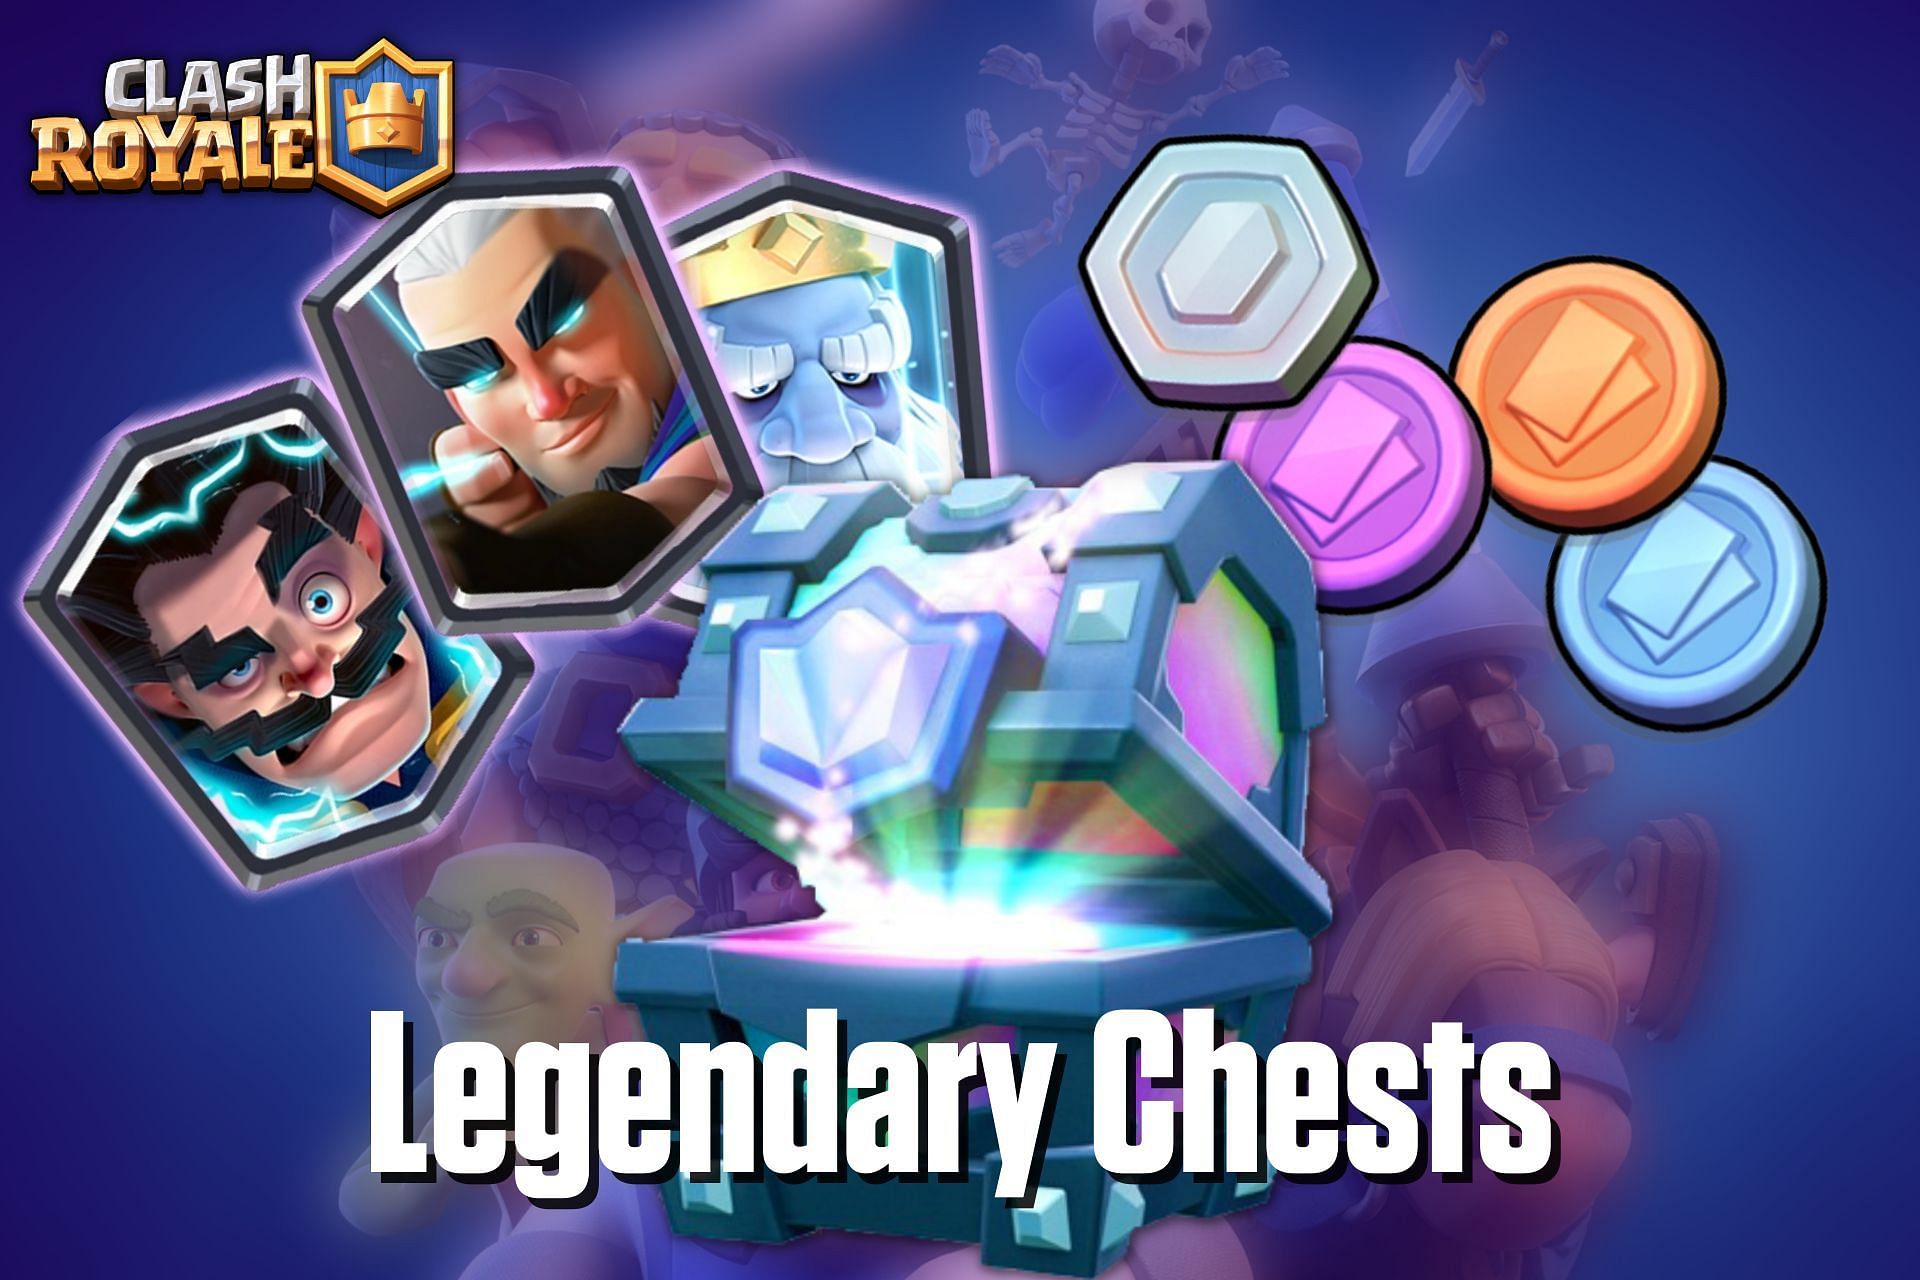 How to get Legendary Chests in Clash Royale (Image via Sportskeeda)